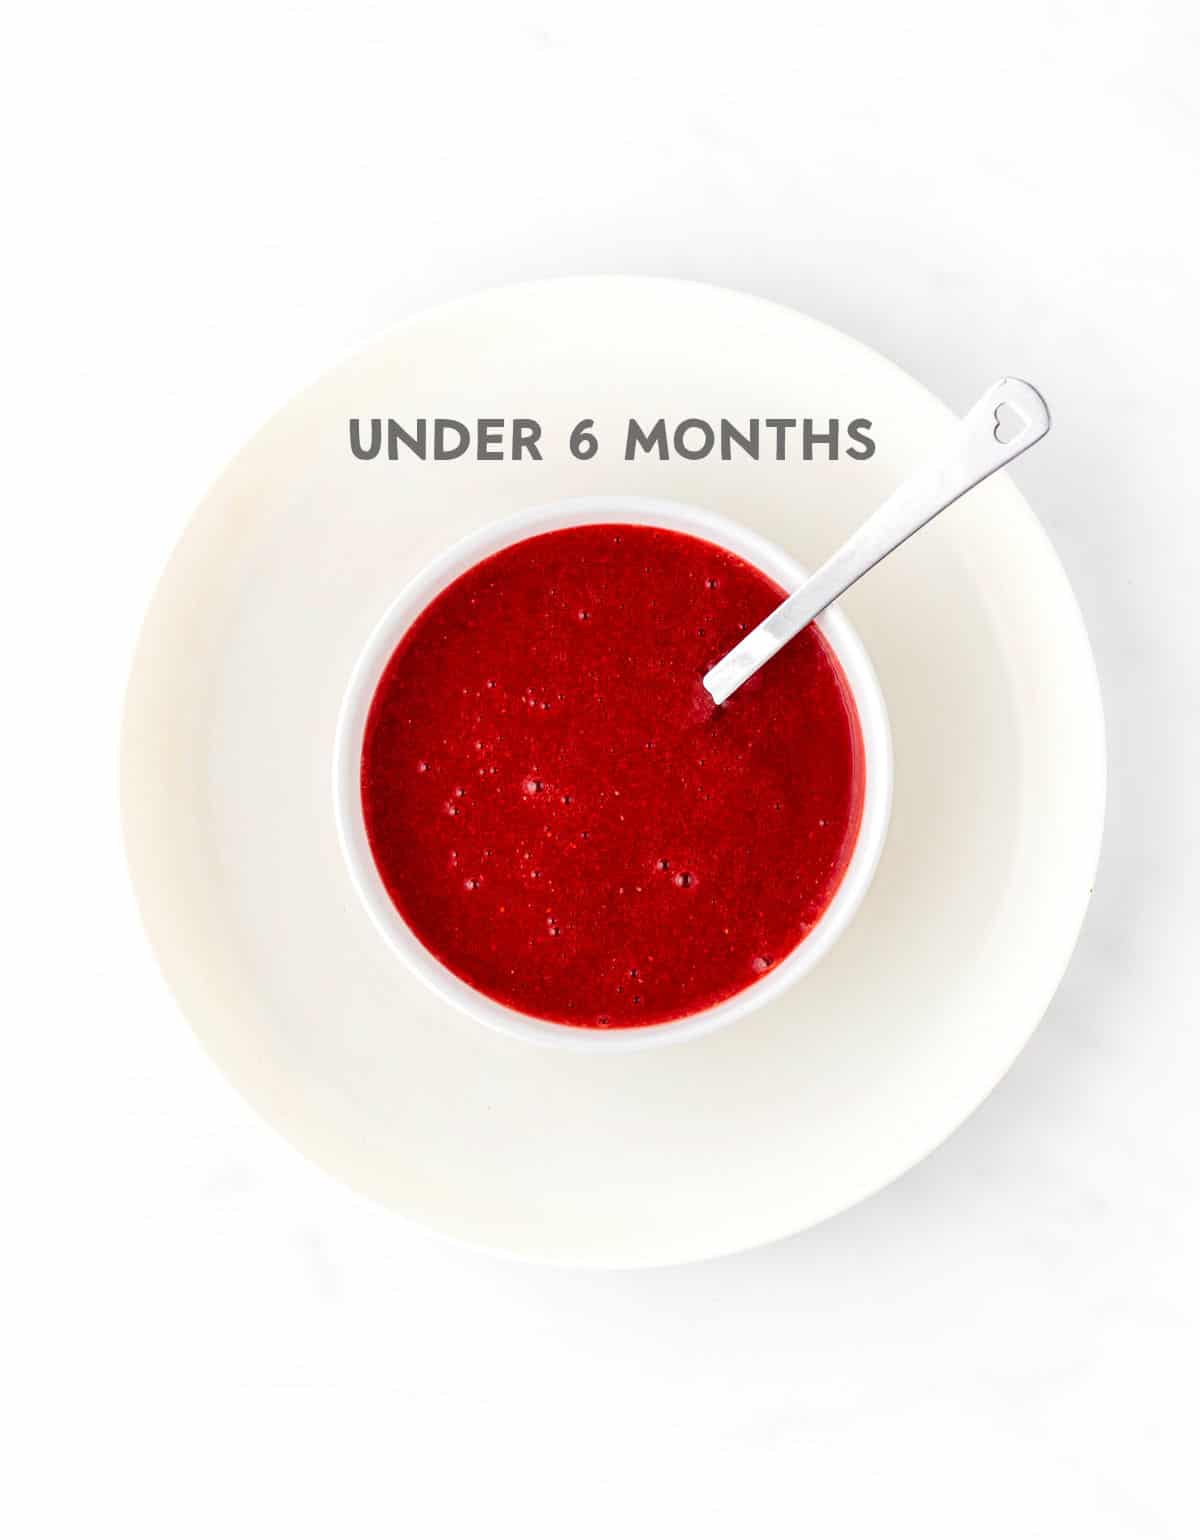 A bowl of strawberry puree for a baby under 6 months old.